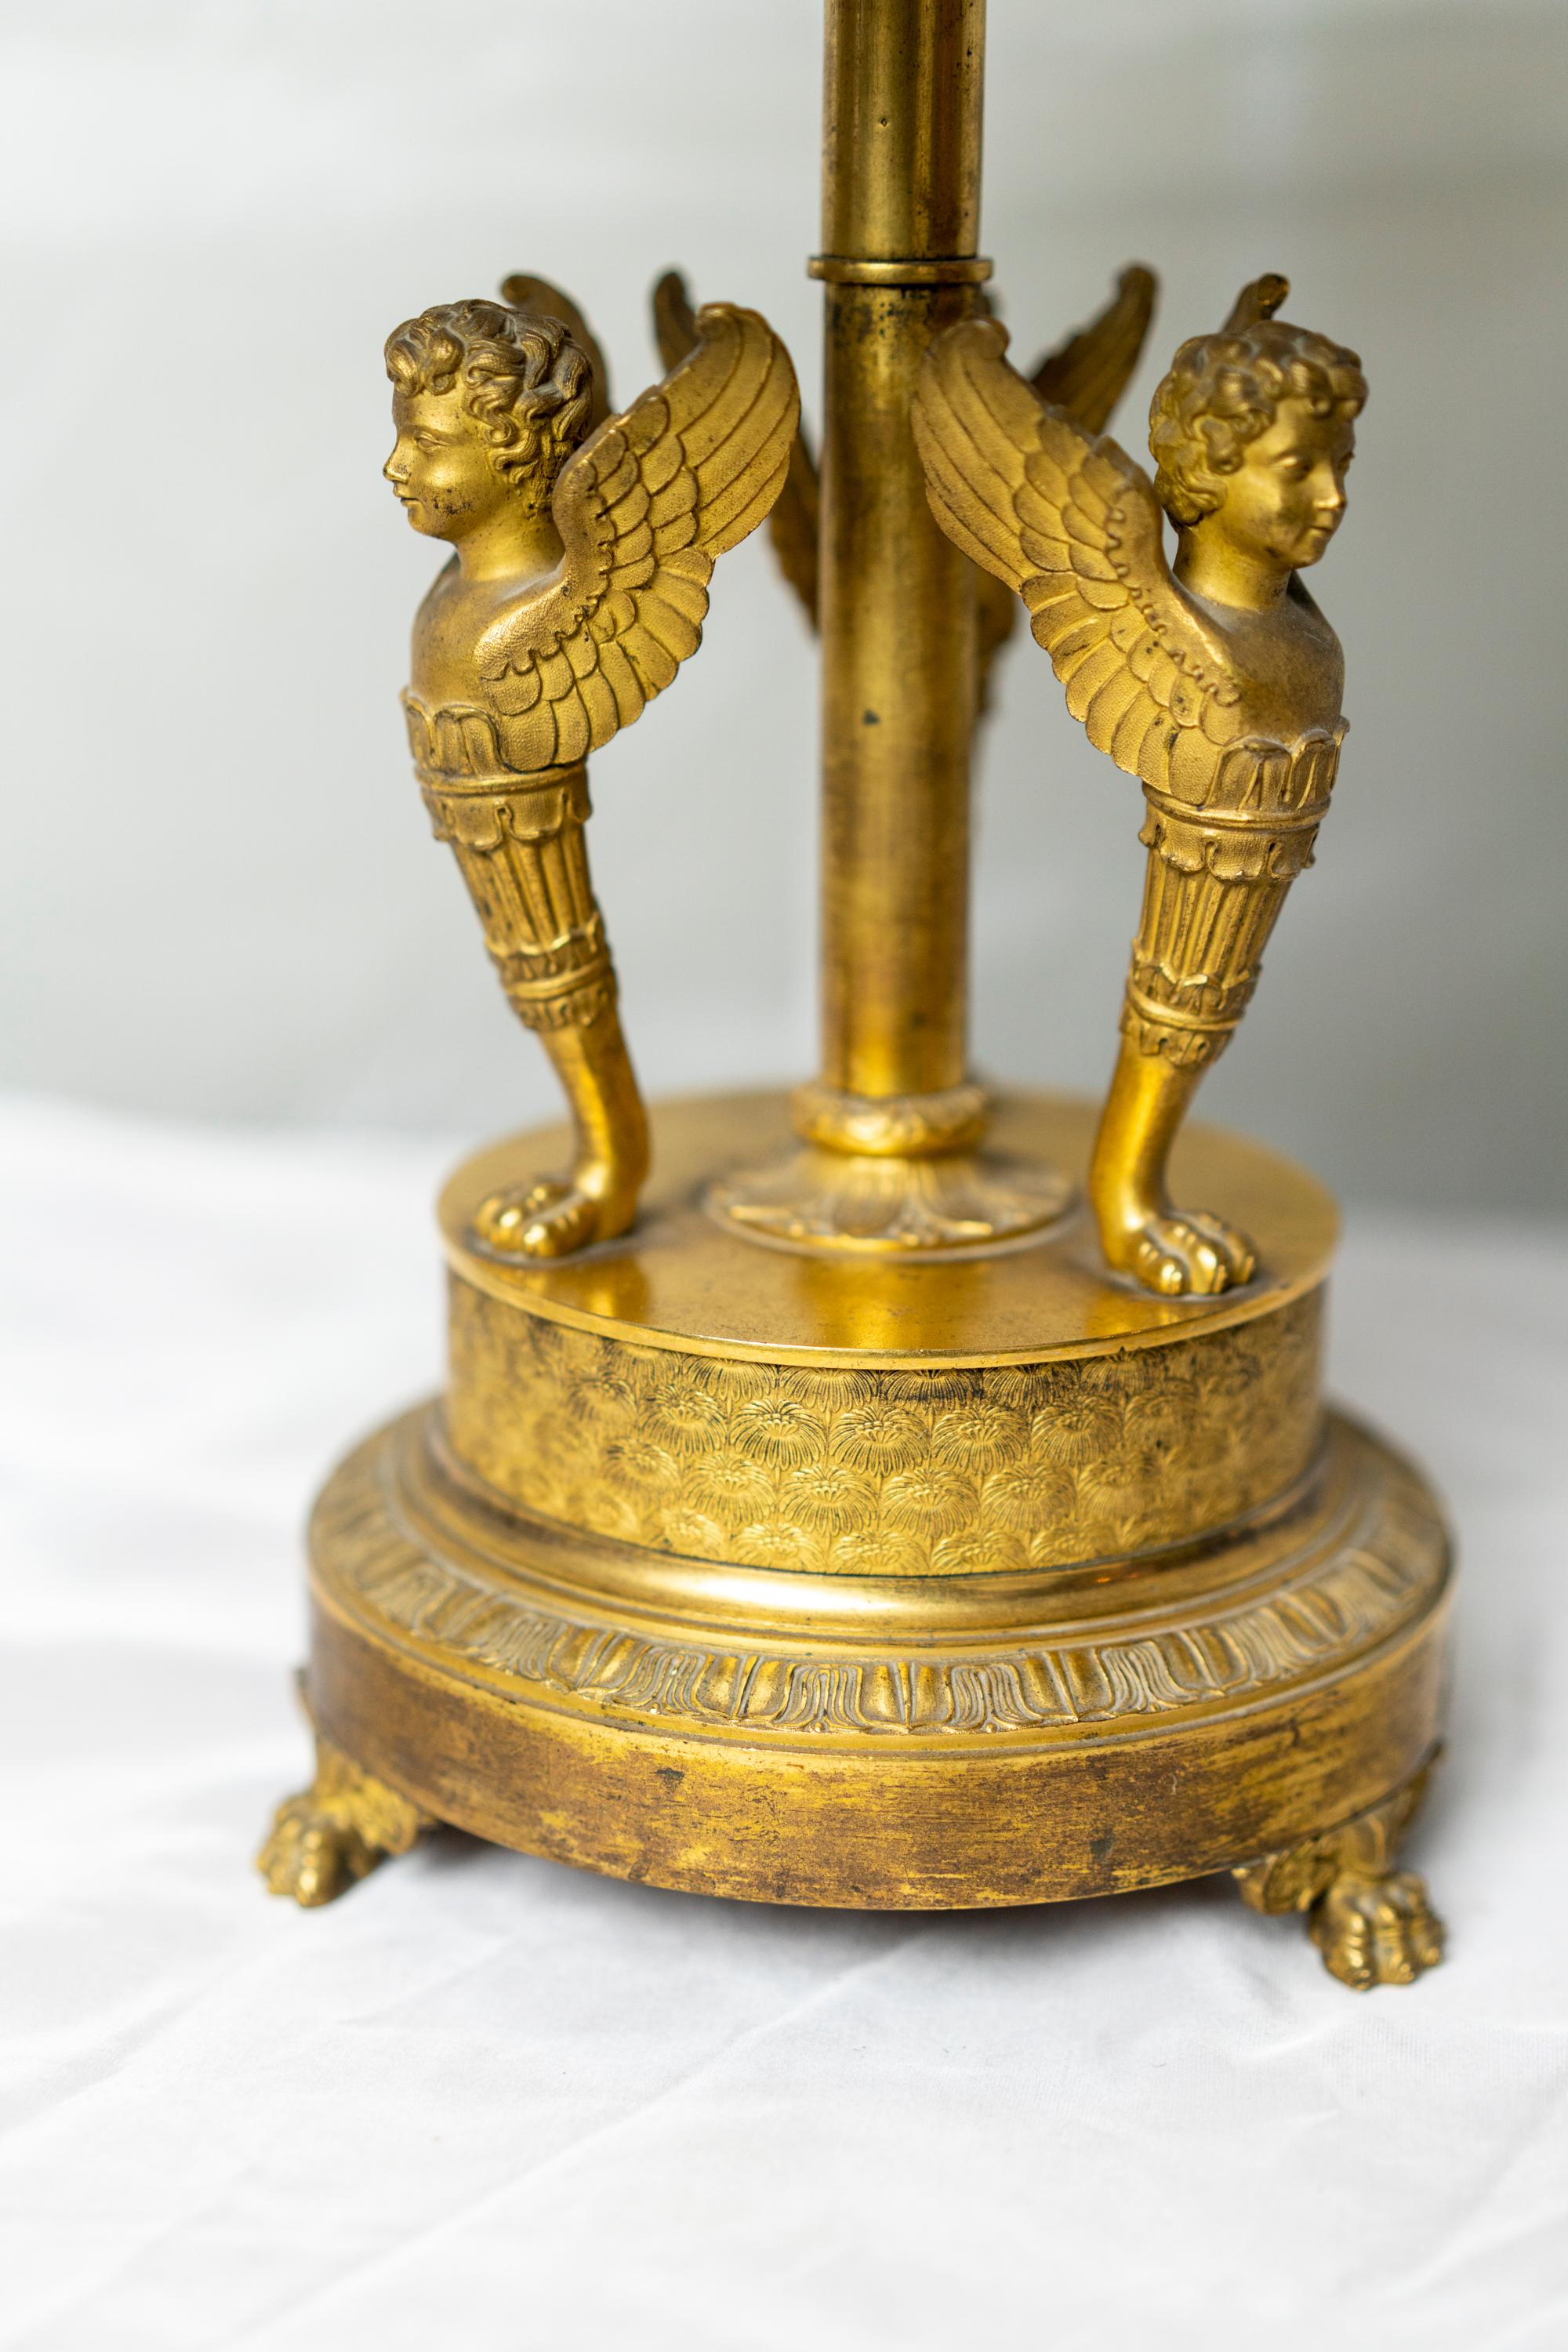 Fine and rare Empire period gilt bronze bouillotte table lamp with cherubs and decorated with palms relief and resting on paws feet base.